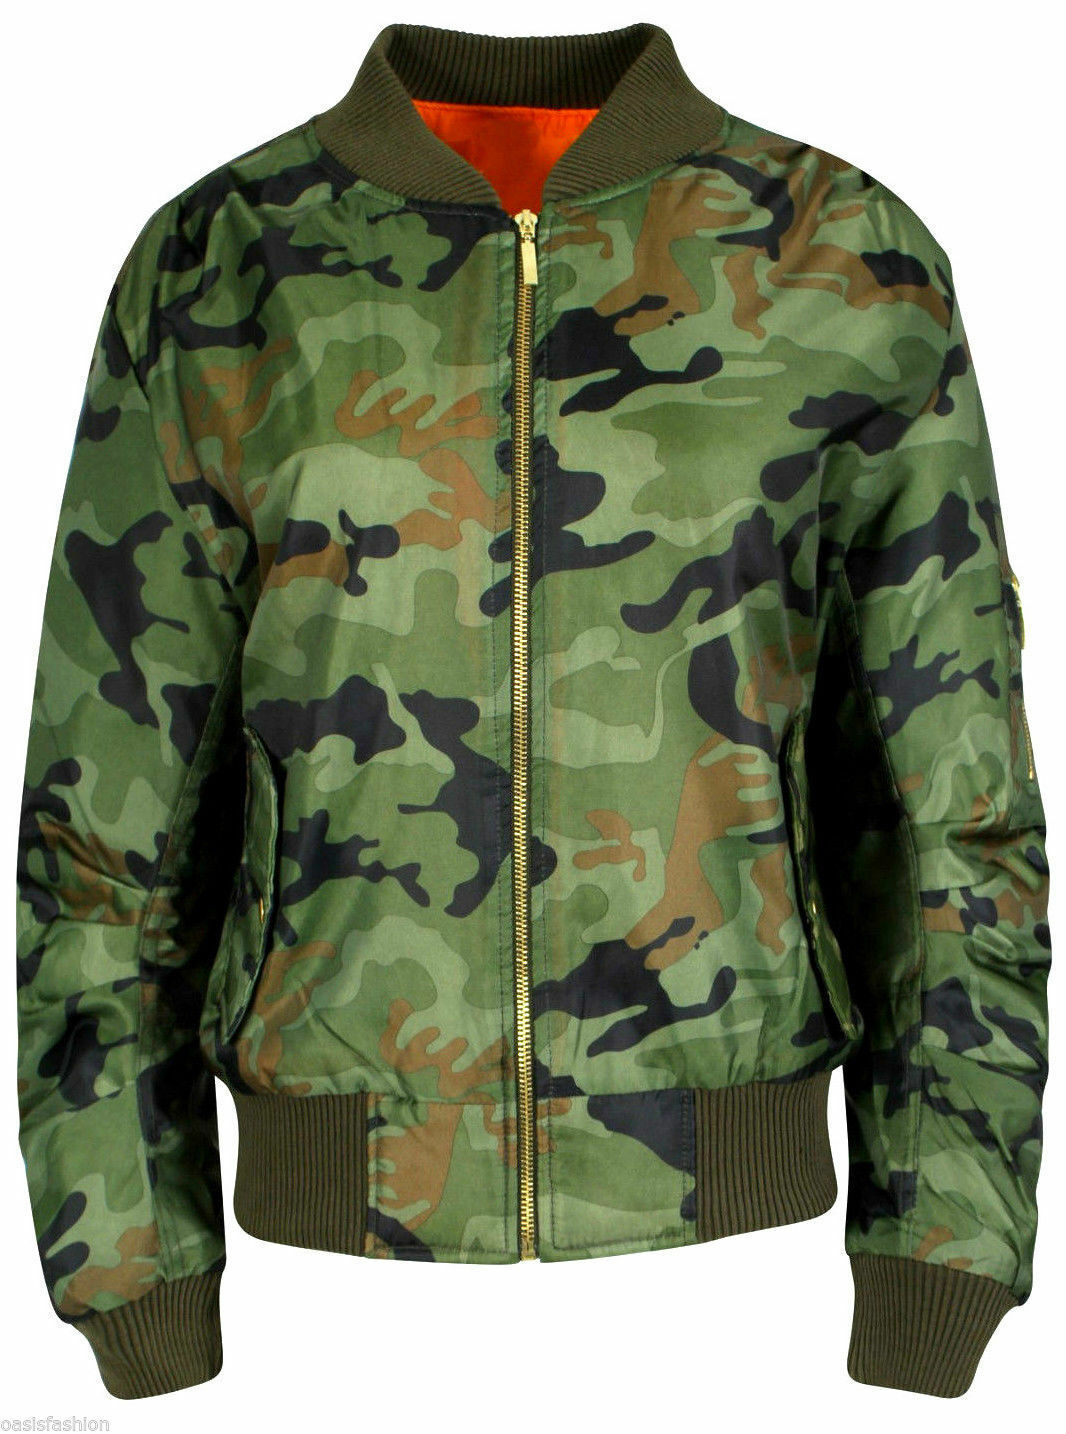 Children's Camo Design Bomber Jacket.It Has An Elasticated Ribbed Collar, Waistband & Cuffs. Has 2 Front Pockets And Pocket On The Sleeve . Ages 5-16 Available.